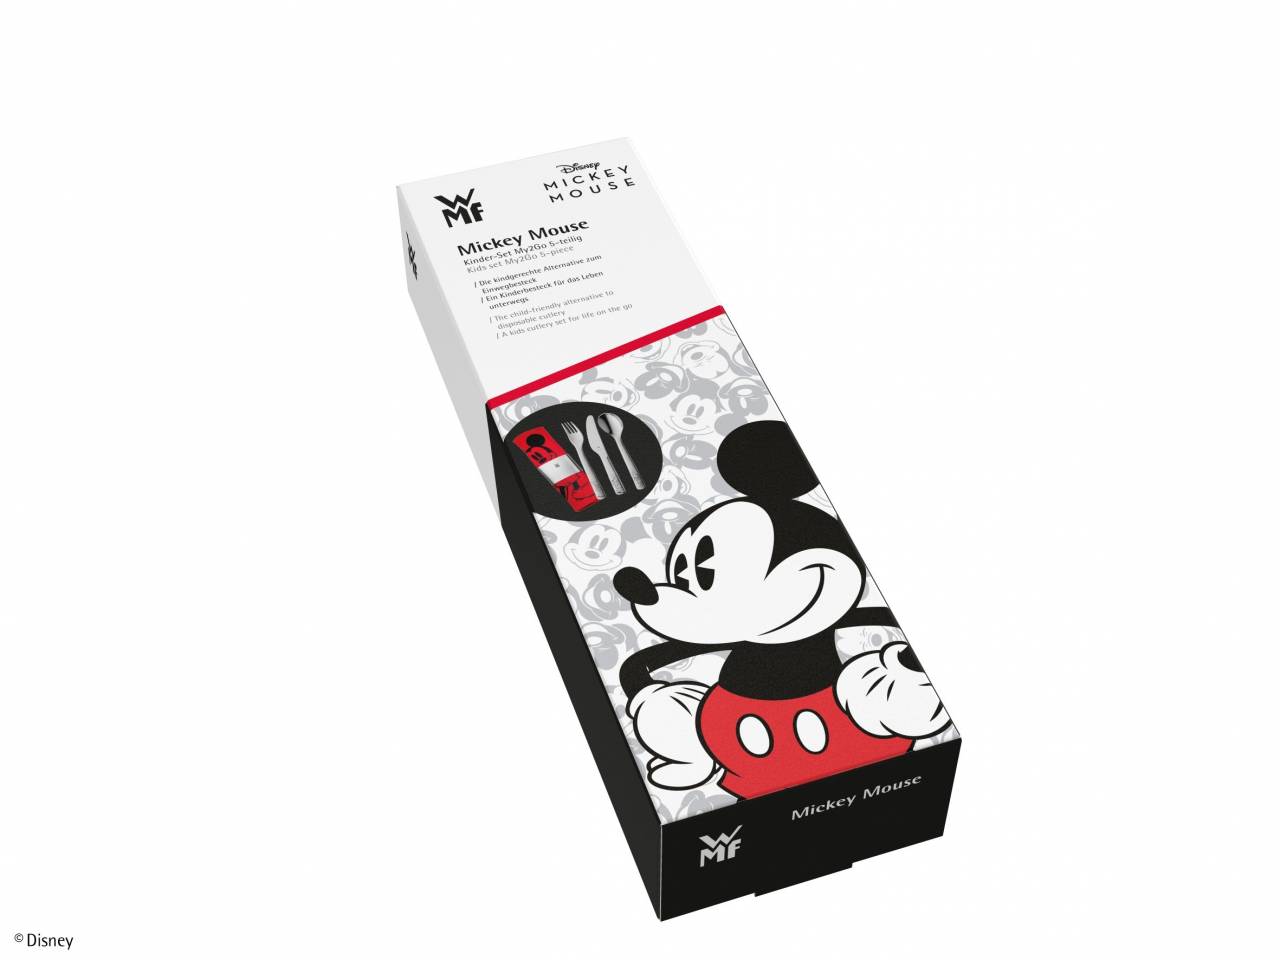 pribor-my2go-mickey-mouse-www.wmfsk.sk-10.jpg